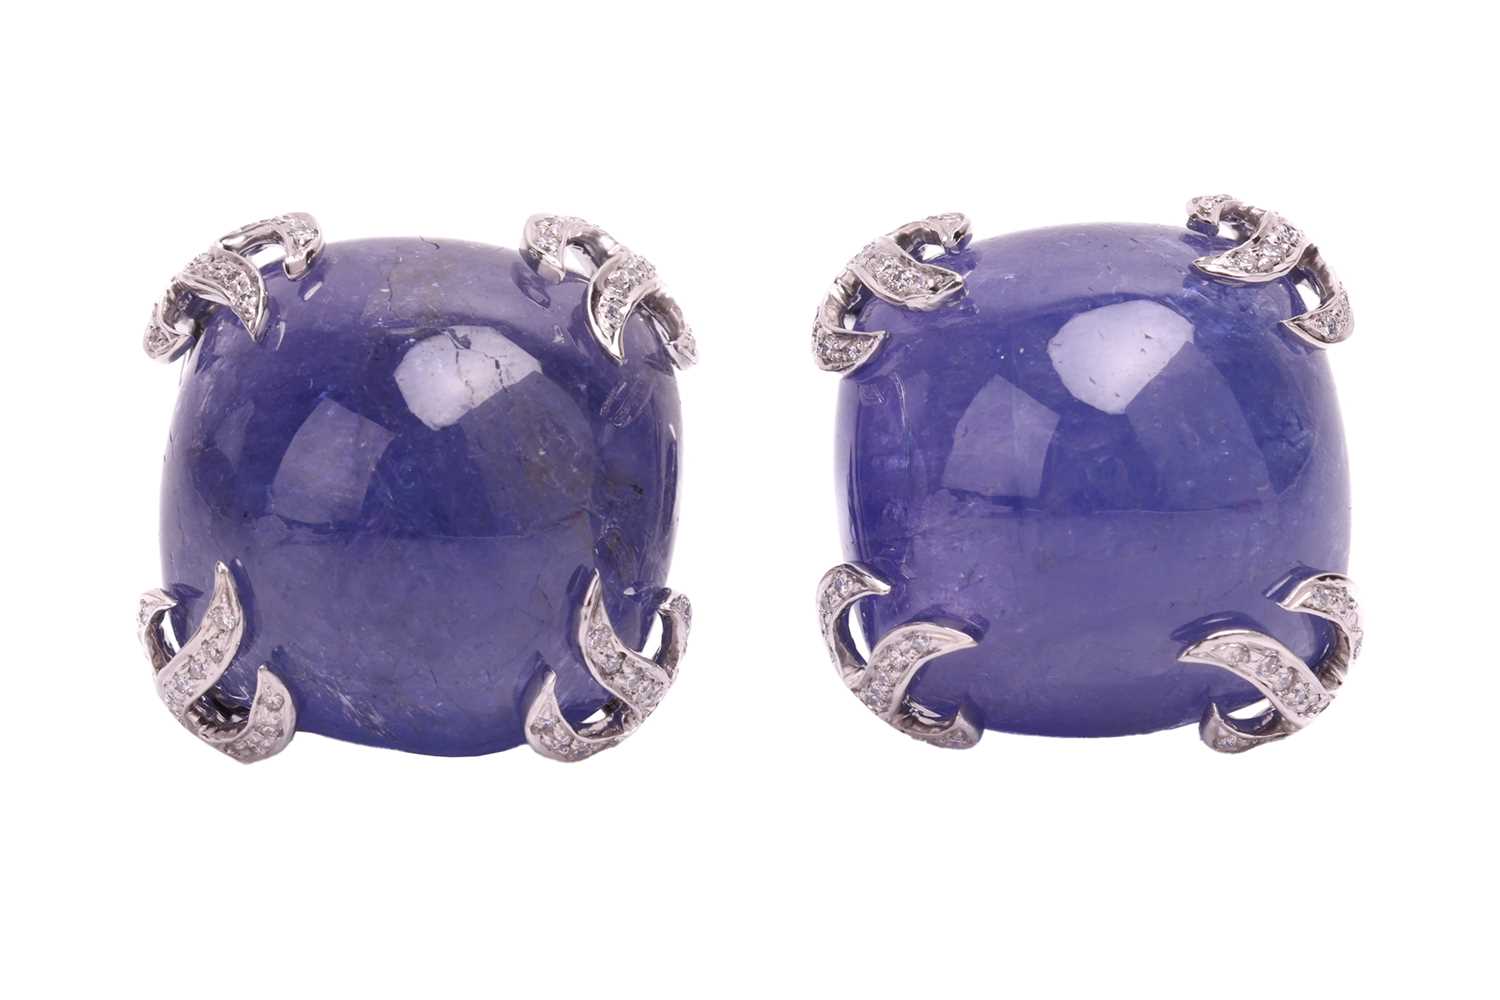 A pair of tanzanite and diamond earrings, each set with a cabochon tanzanite measuring 16 x 16 x 9.6